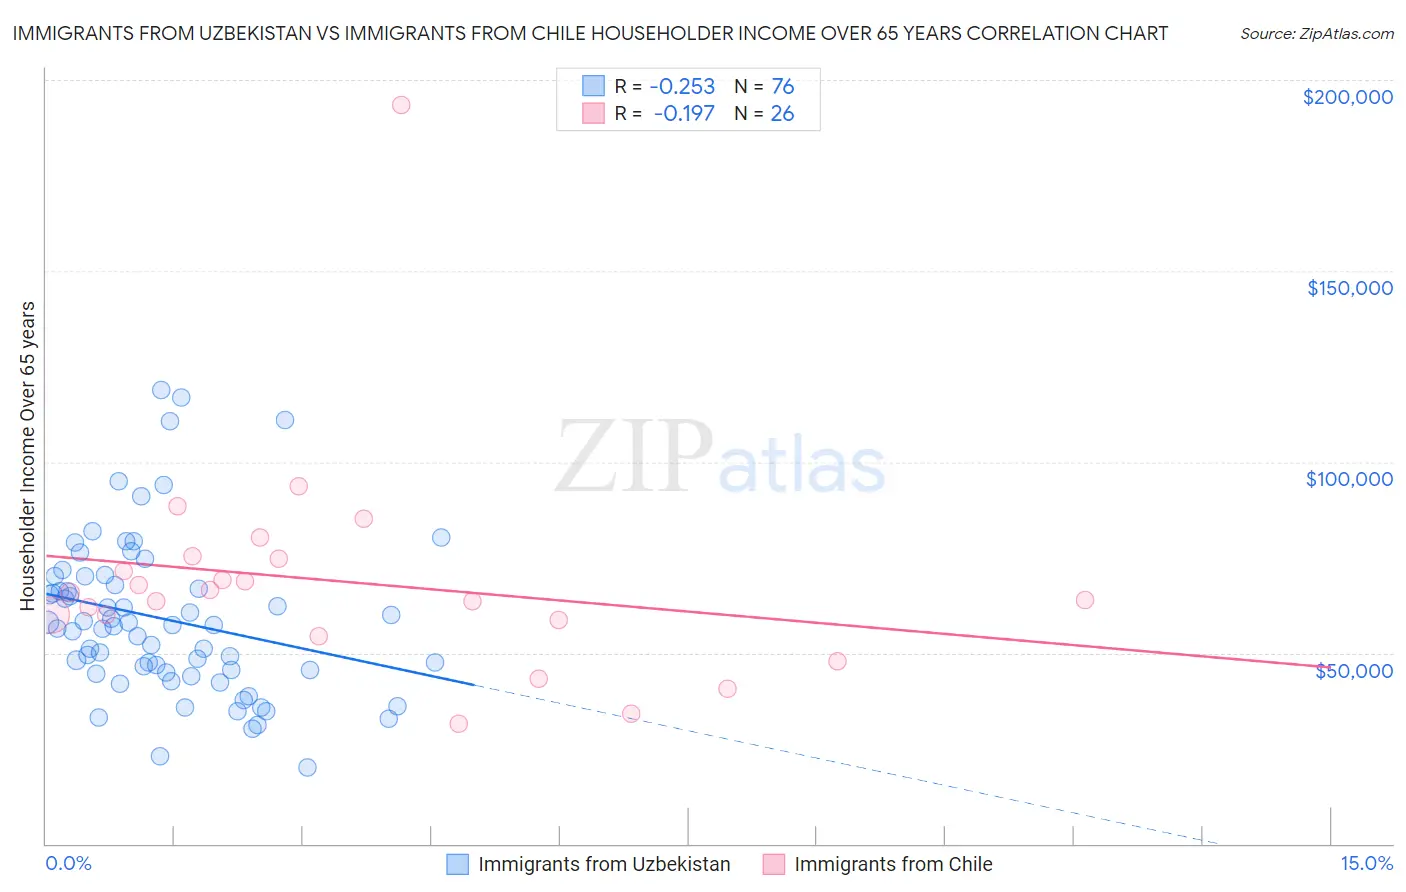 Immigrants from Uzbekistan vs Immigrants from Chile Householder Income Over 65 years